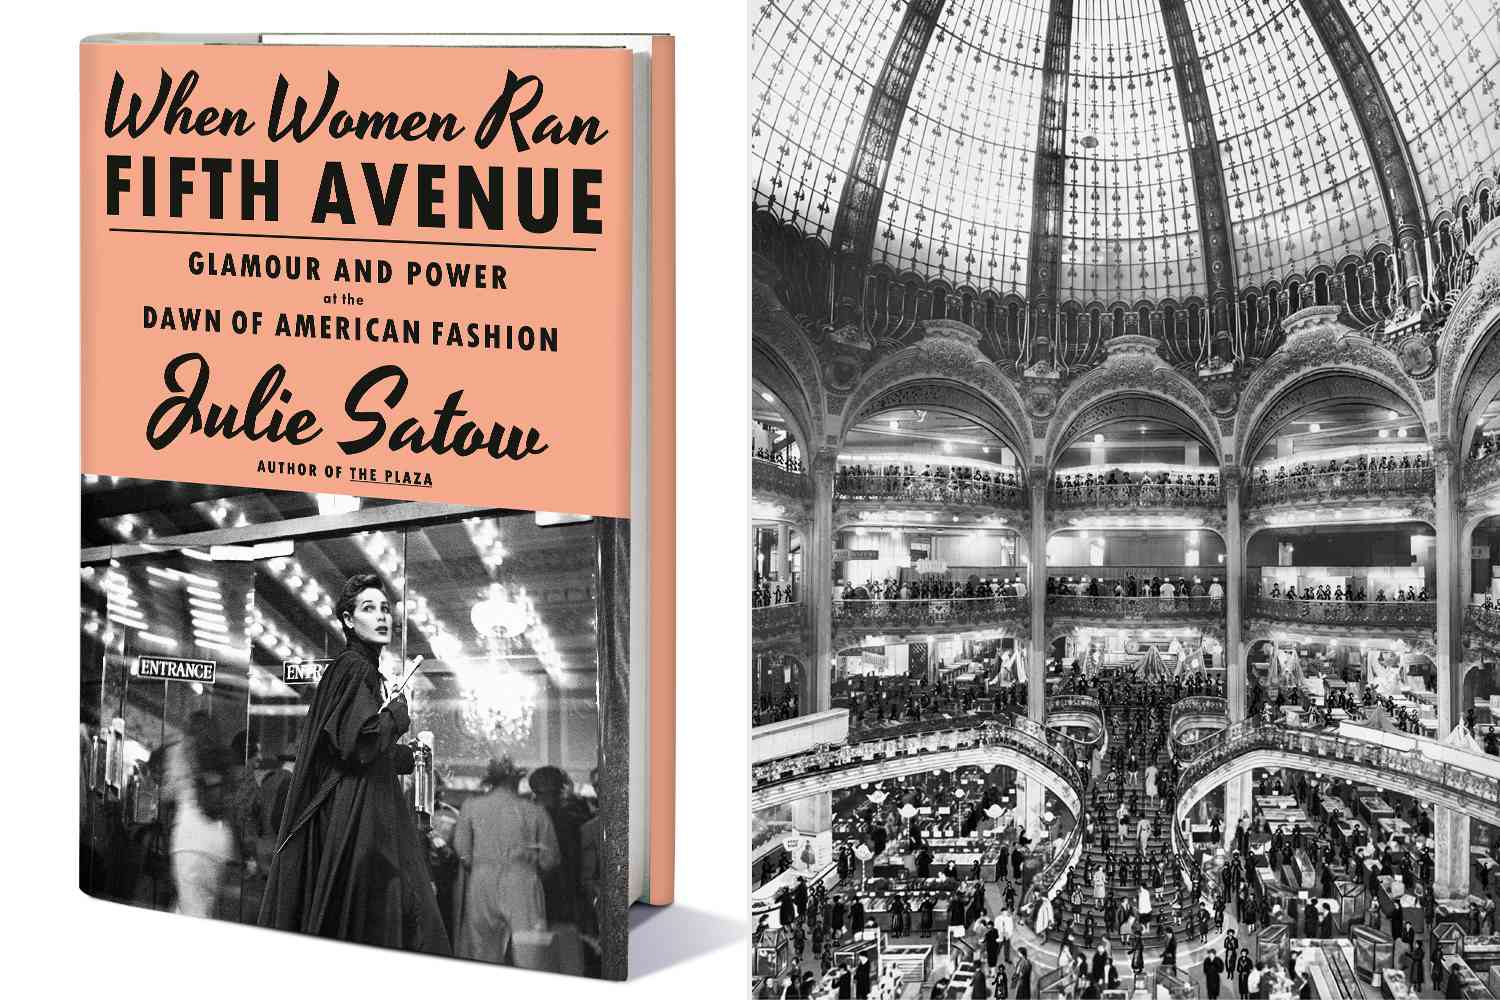 Revisiting the Golden Age of Department Stores — Donald Trump, Mad Men and Abraham Lincoln Are Involved (Exclusive)